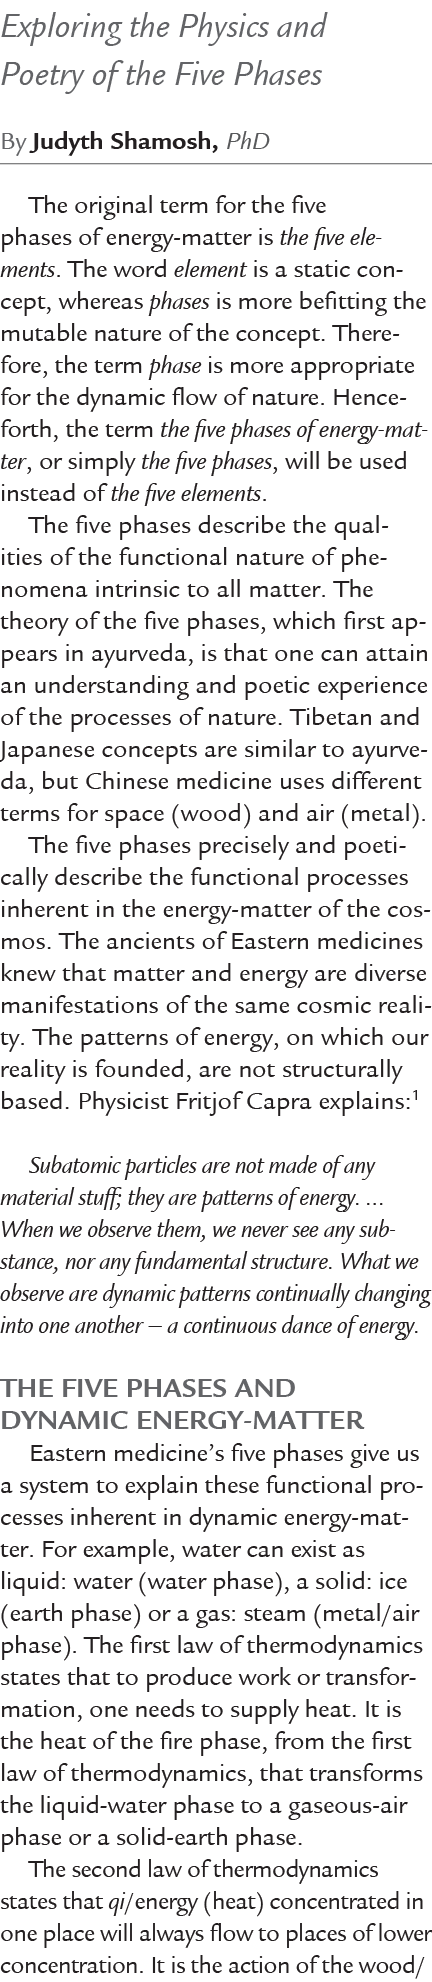 Exploring the Physics and Poetry of the Five Phases By Judyth Shamosh, PhD The original term for the five phases of e...